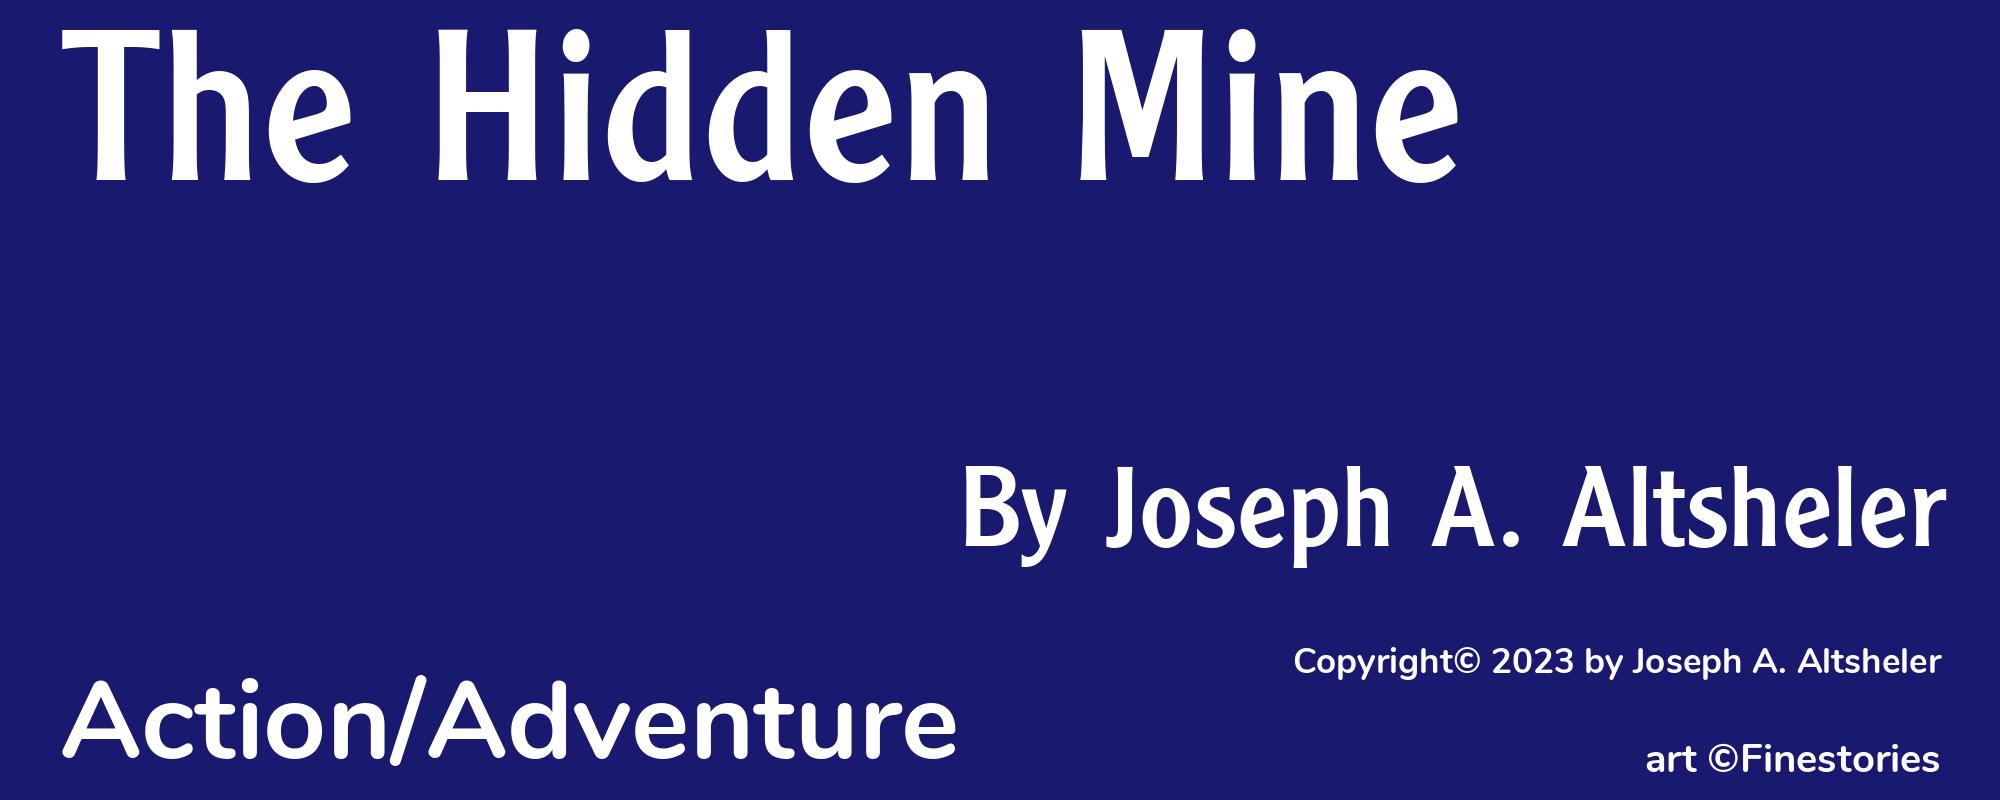 The Hidden Mine - Cover